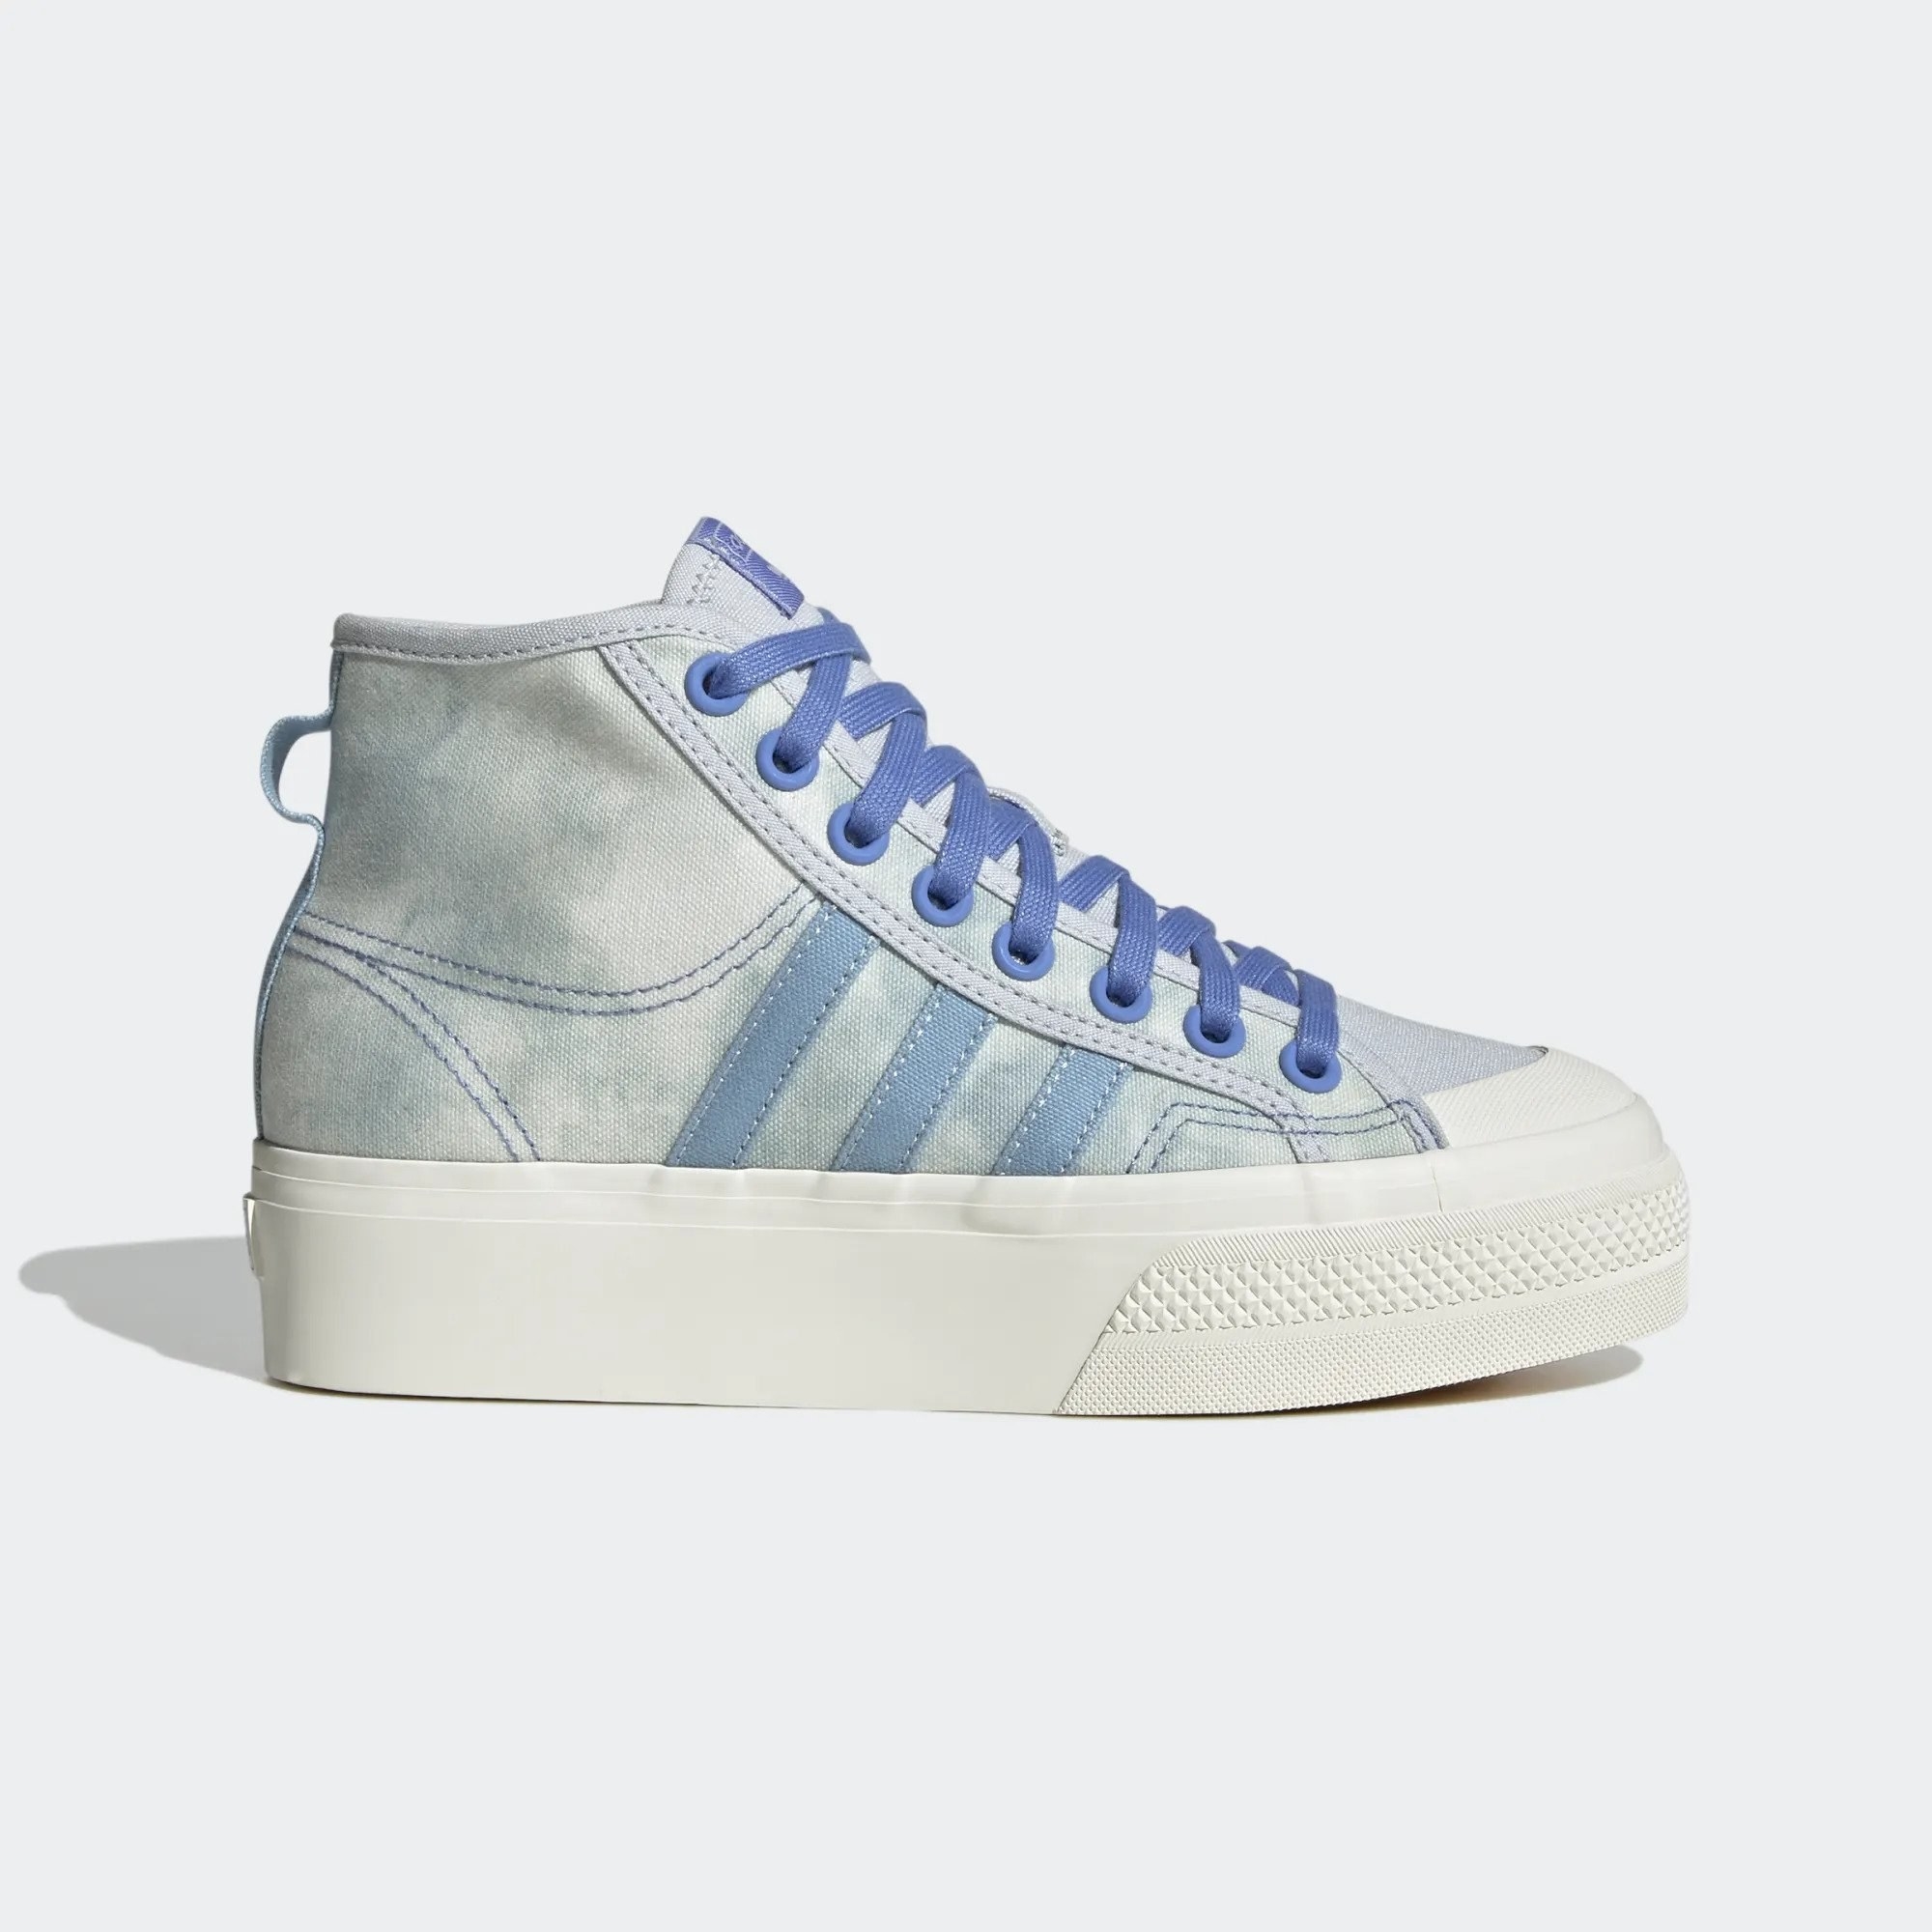 22 High-Tops Reviewers Say Are Comfy And Stylish